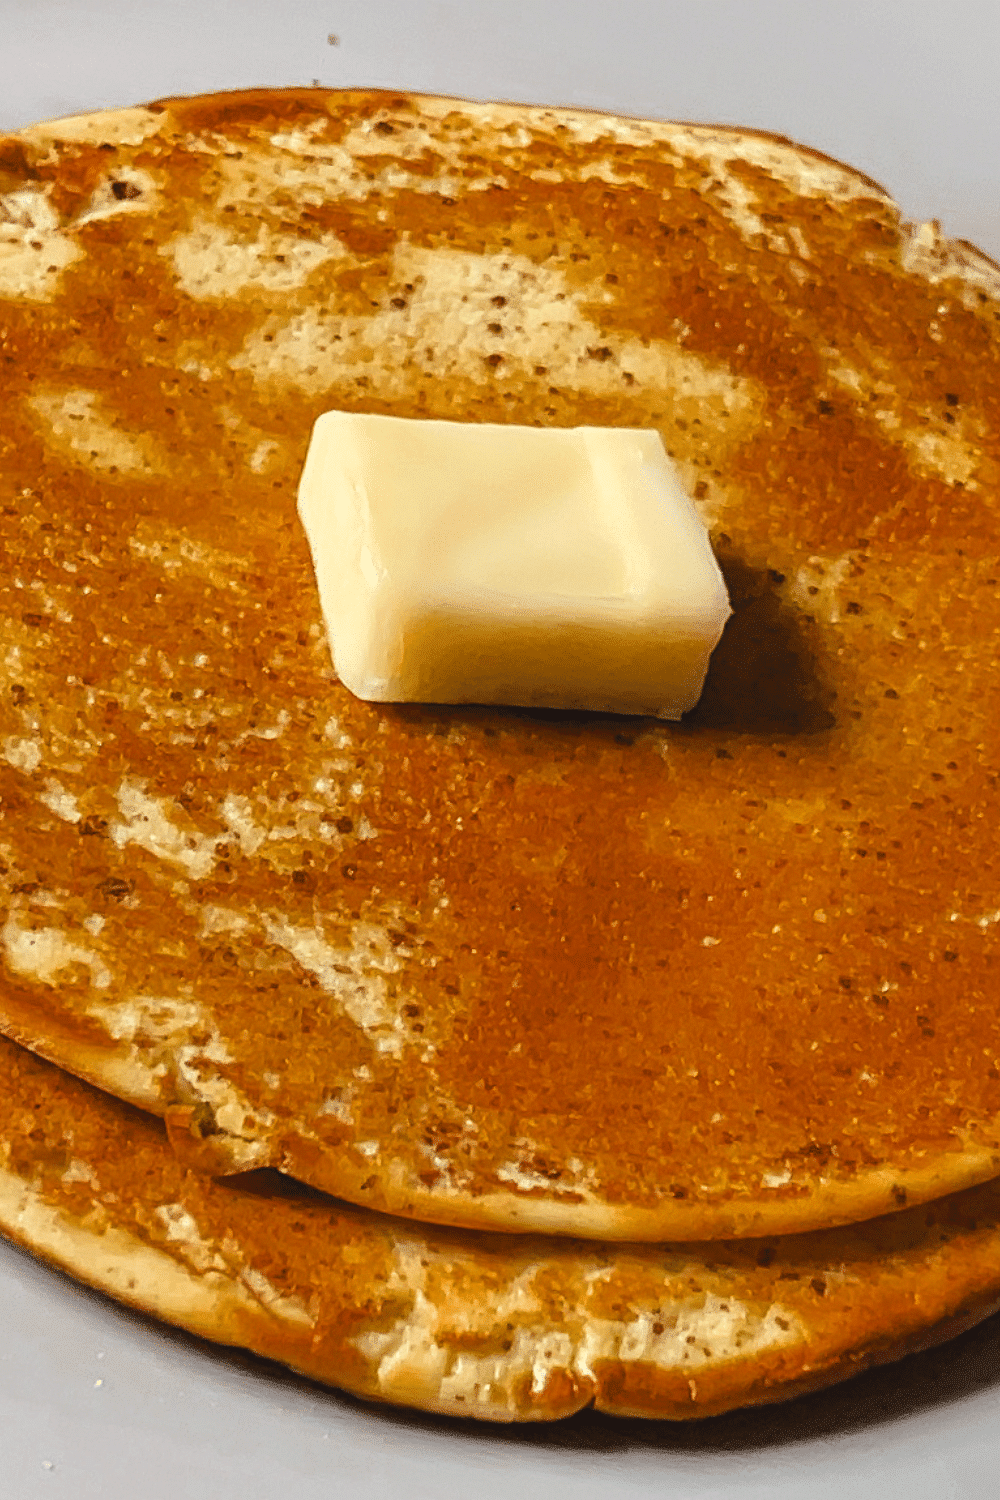 keto cream cheese pancakes served on a white plate with a large yellow pat of butter on top ready to eat